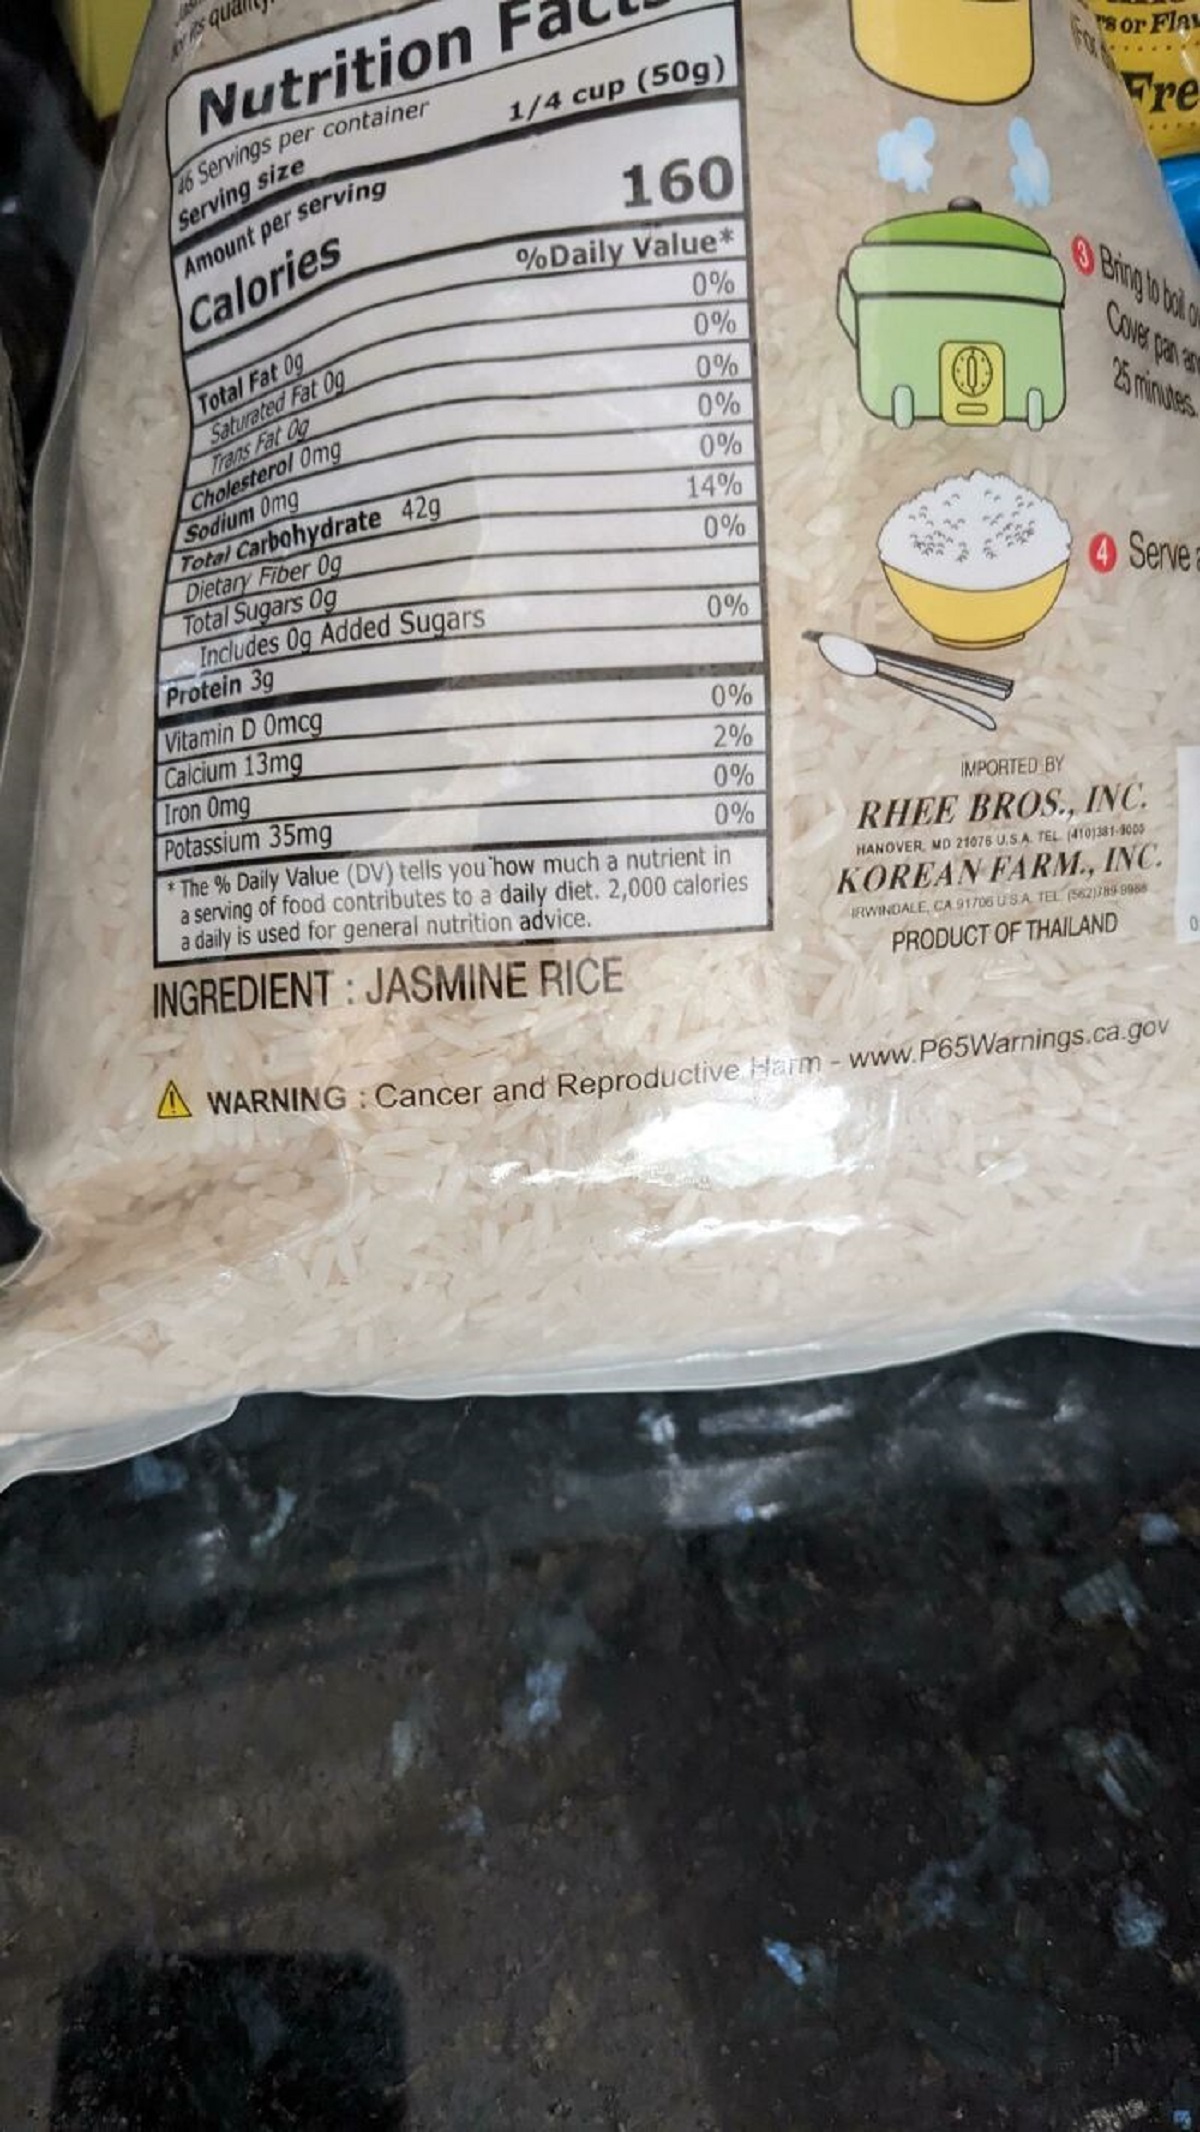 jasmine rice cancer warning - Nutrition F Serving se Calories 14 cup 50g 160 Daily Value Fre 0% 0% 0% 0% C 99 cahydrate 4 34% Alded Sugers O Sener 0% 0% 25 0% Rhef Bros, Inc daly de 2 Korean Farm, Inc Ingredient Jasmine Rice Product Of Talan Awarning Canc